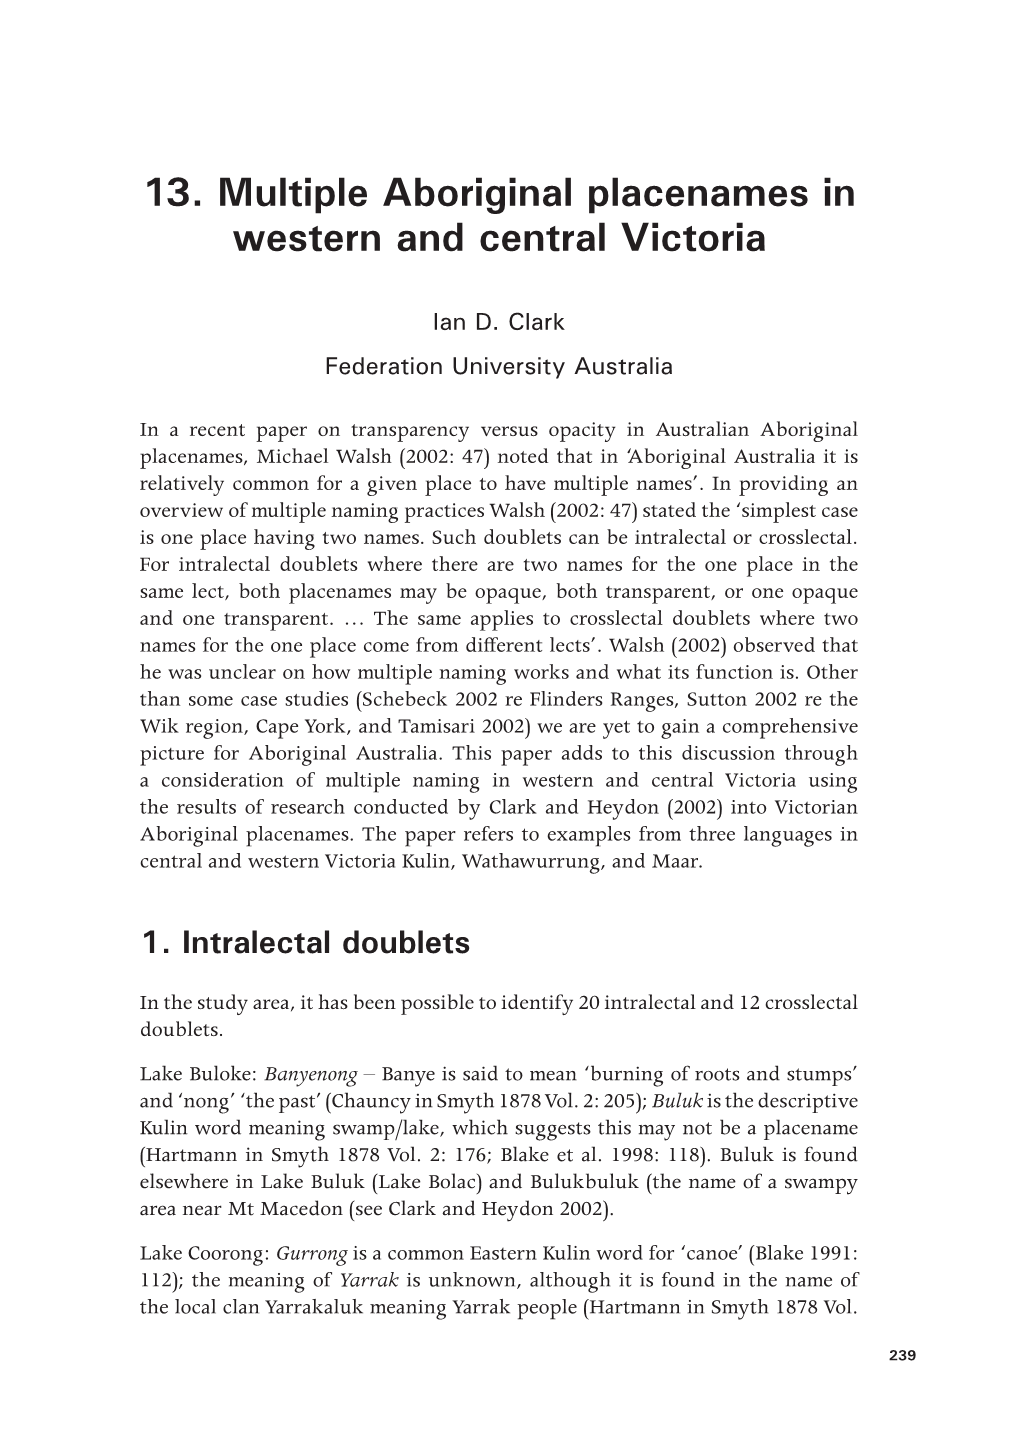 13. Multiple Aboriginal Placenames in Western and Central Victoria